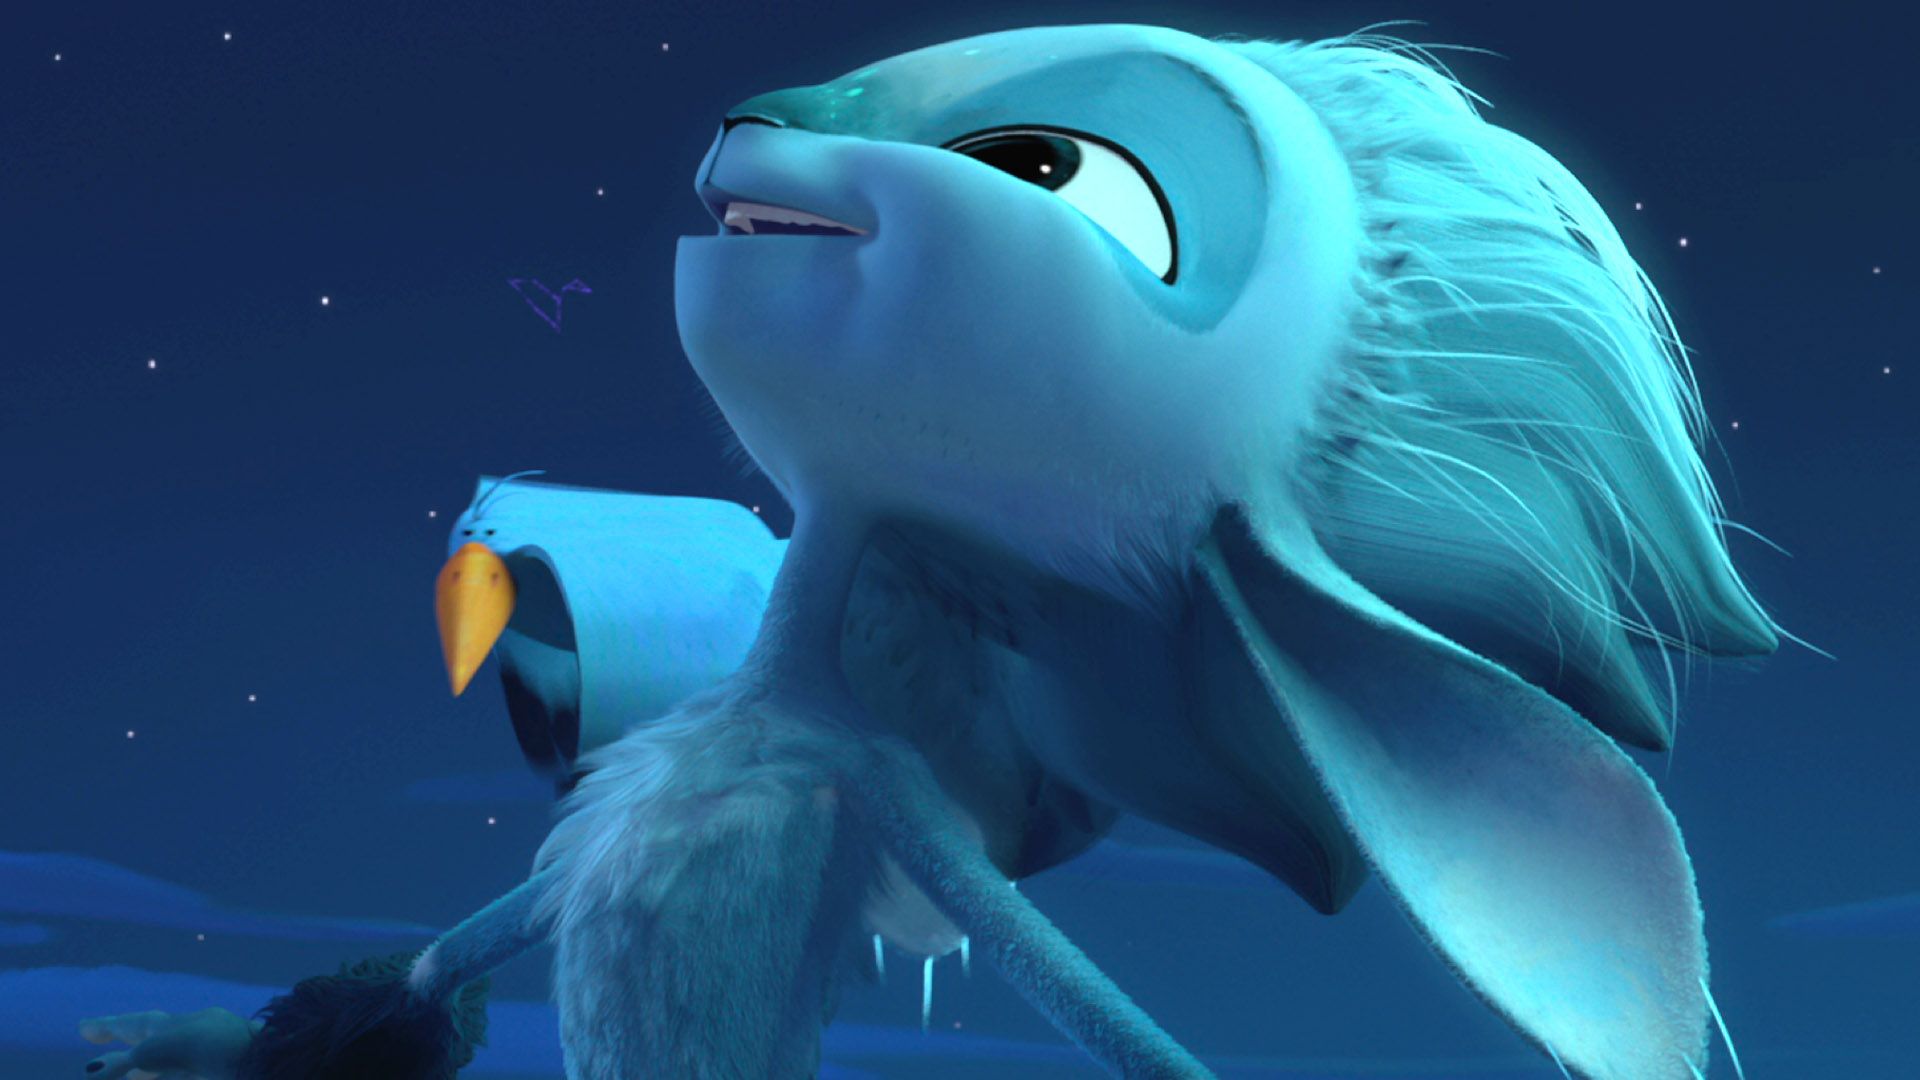 Mune: Guardian of the Moon (2017) Movie Photo and Stills